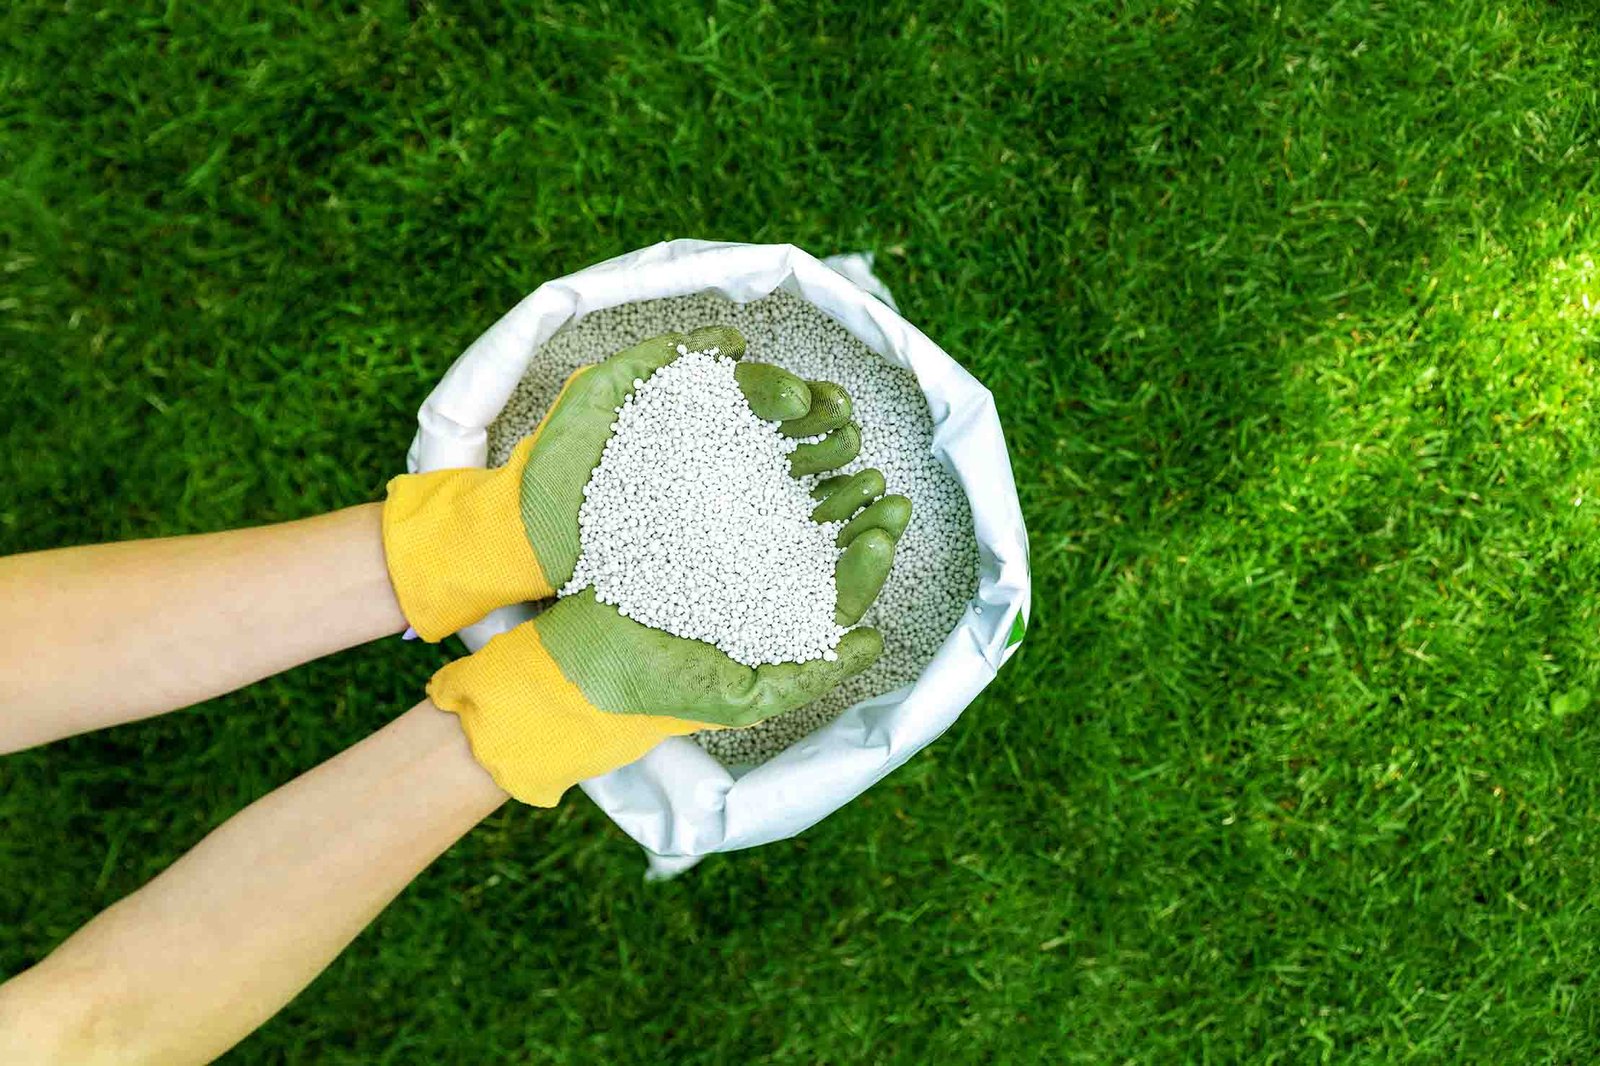 Organic Lawn Fertilizer Brands: Reviews and Recommendations